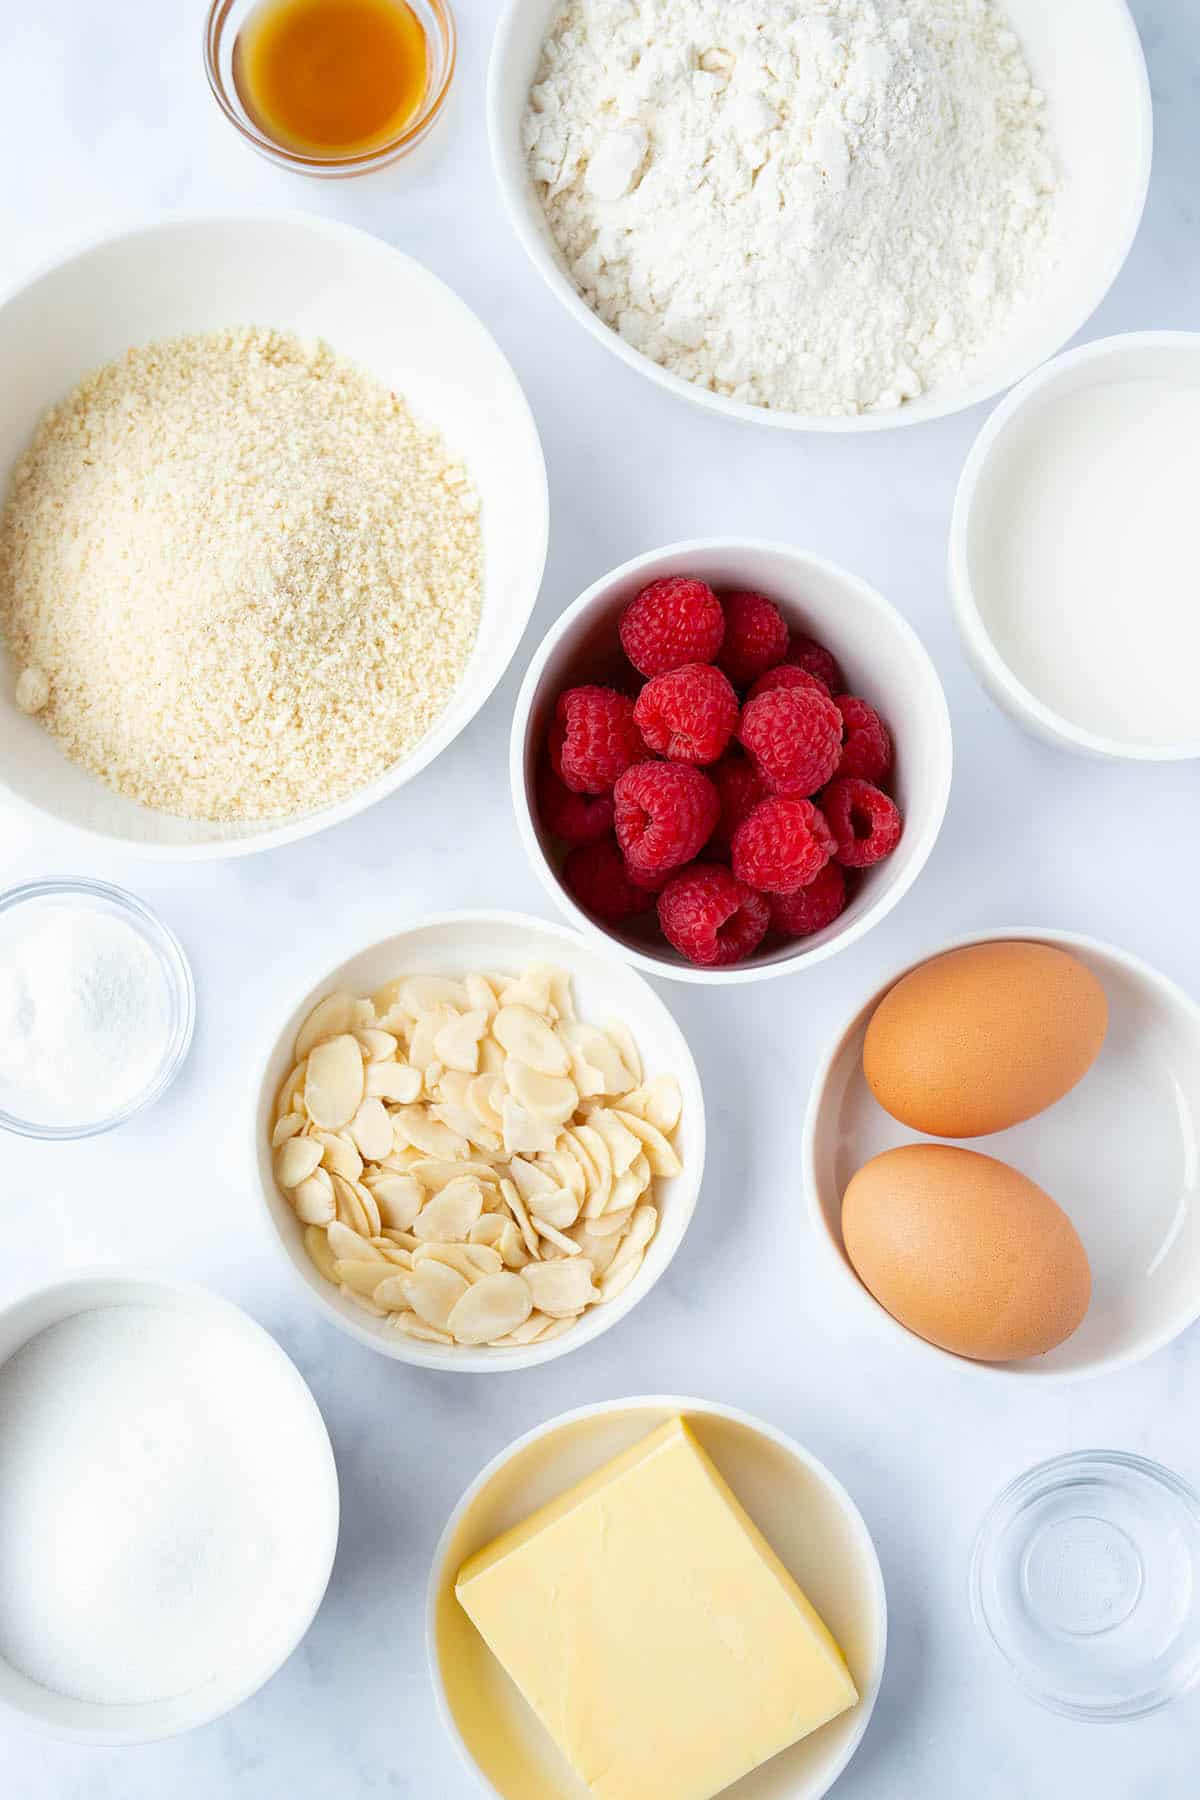 Top view of all the ingredients needed to make a Raspberry Almond Cake from scratch. 